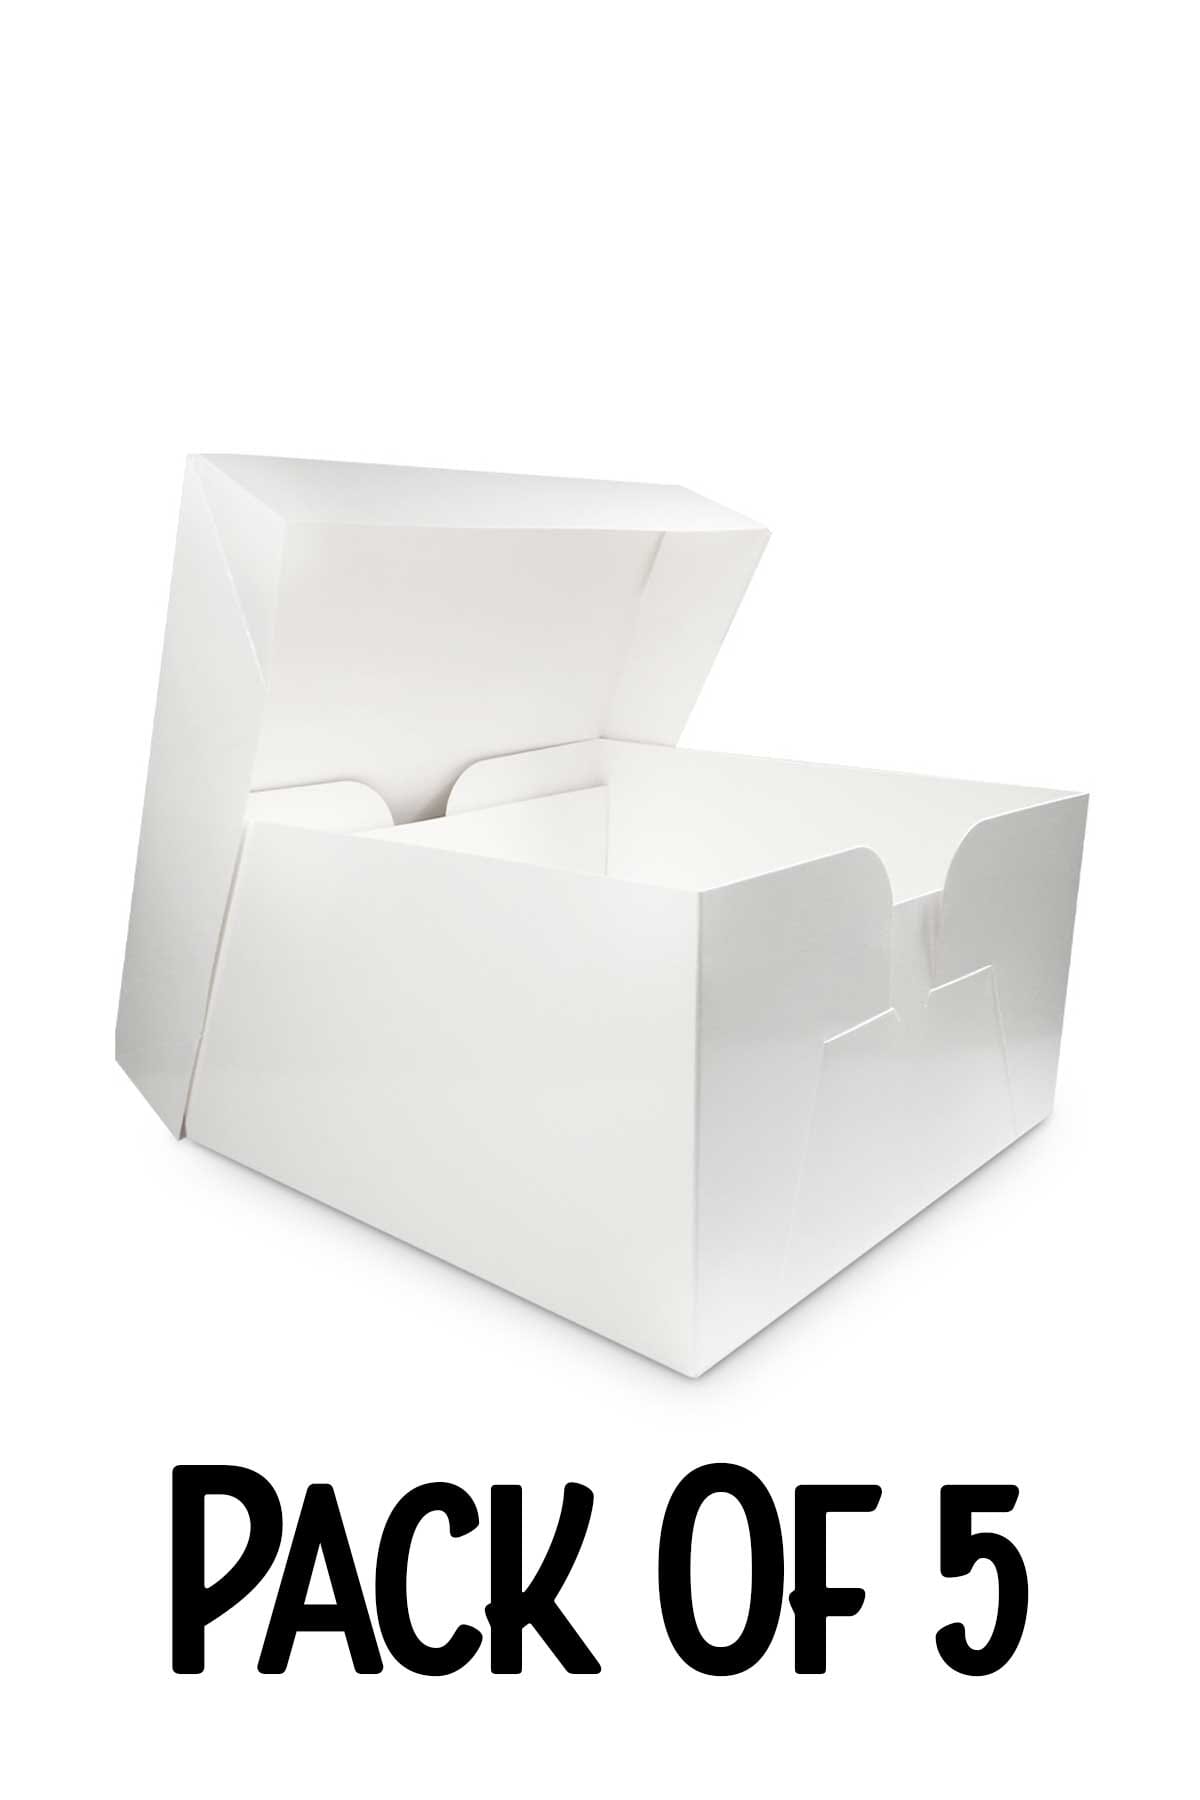 Pack of 5 - White Cake Box & Lid Cake Box Sprinkly 